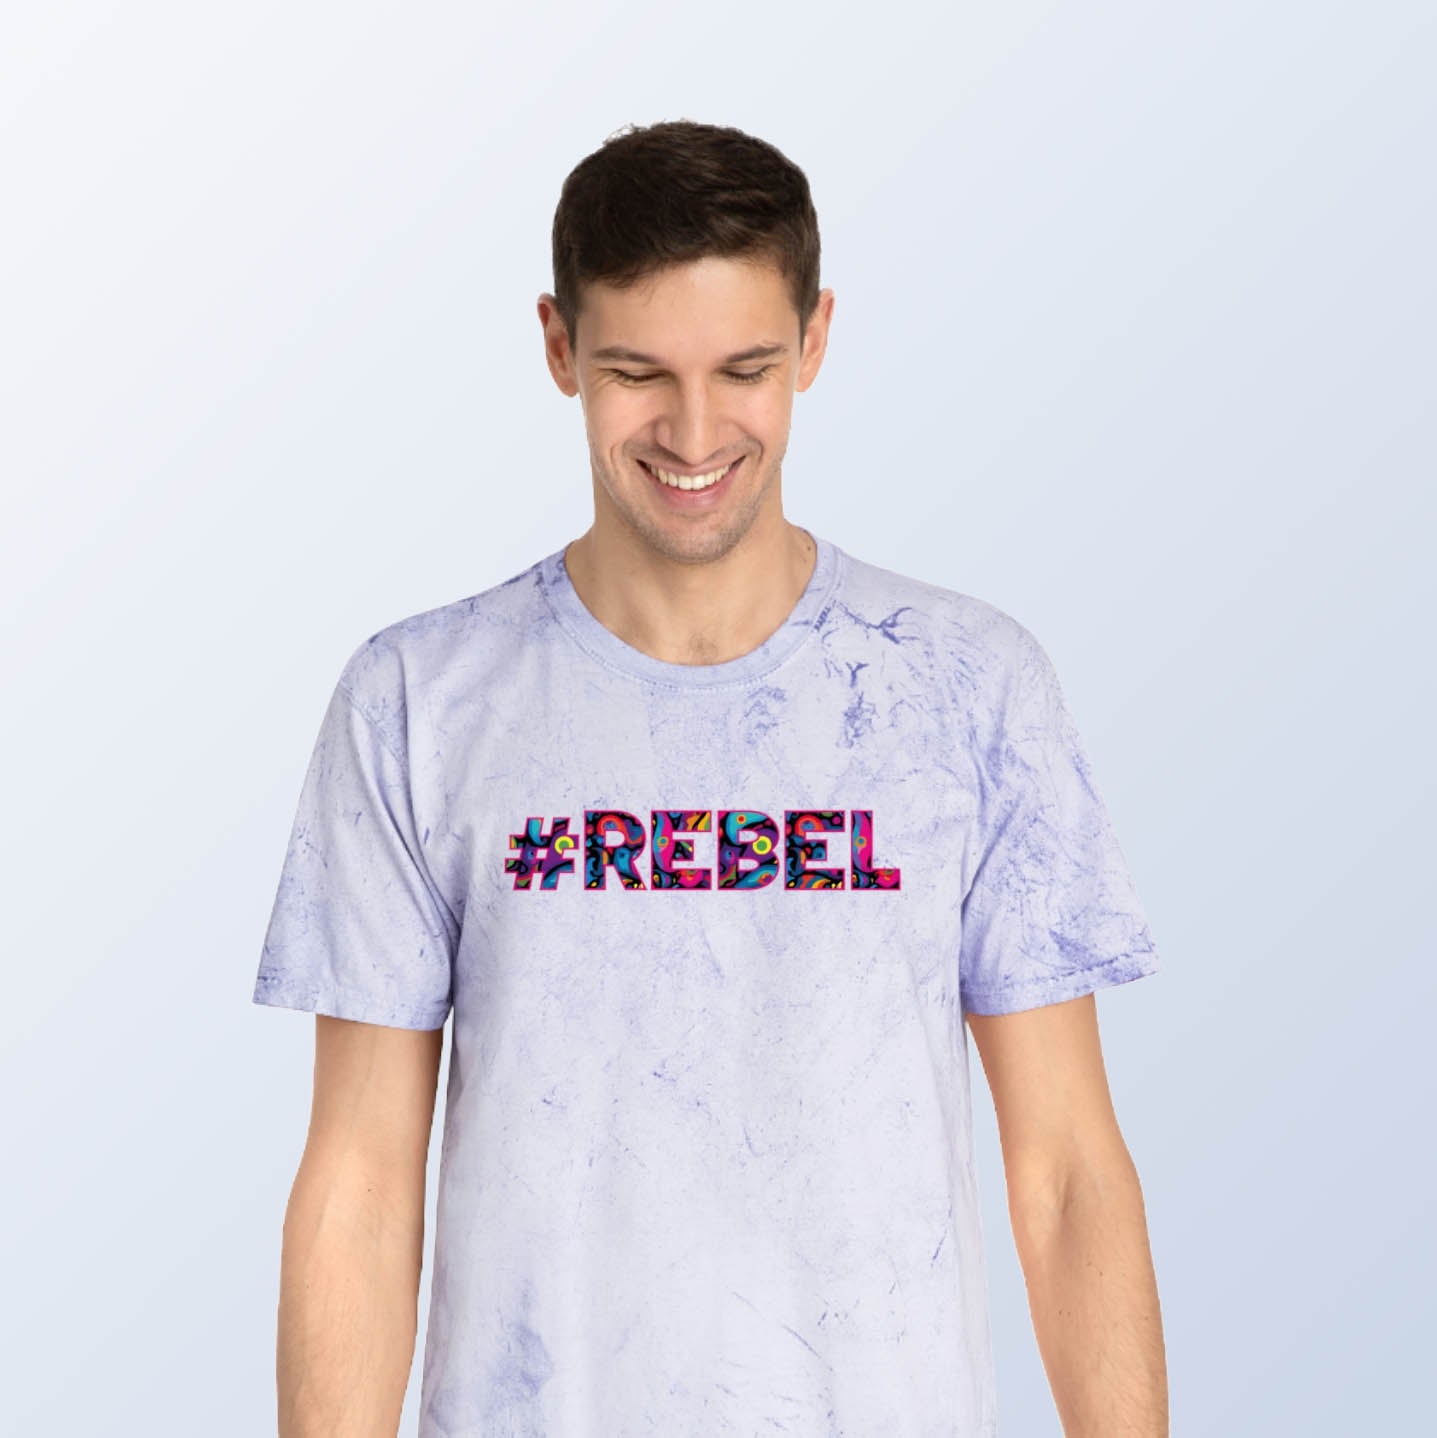 This tie dye t-shirt for man has soft purple colors and has our famous #REBEL meme printed at the front of the shirt. If you are a rebel, you would definitely make a statement with this tie dye shirt!